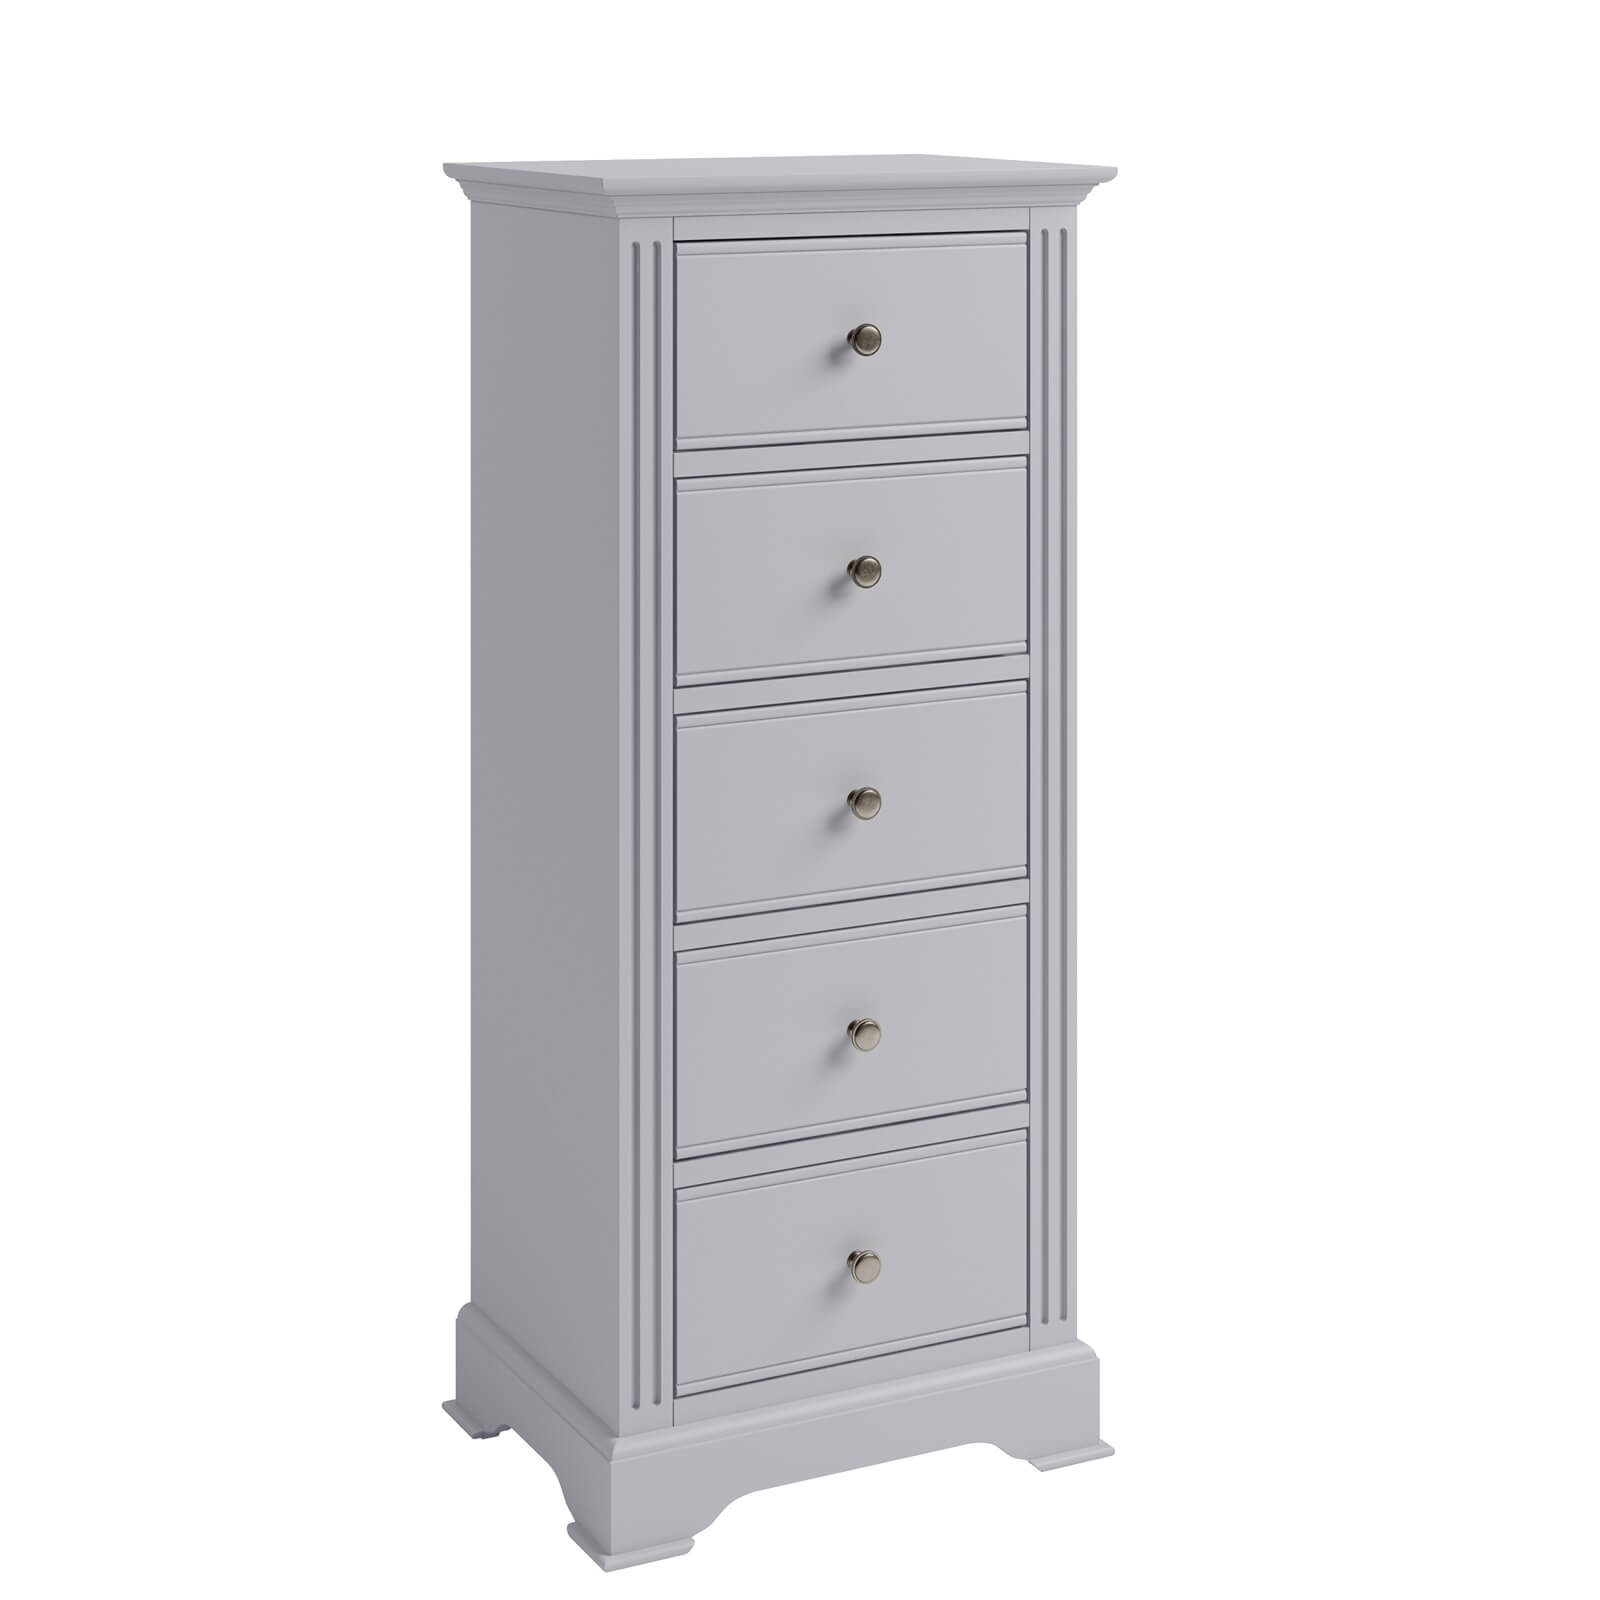 Camborne 5 Drawer Narrow Chest of Drawers - Grey